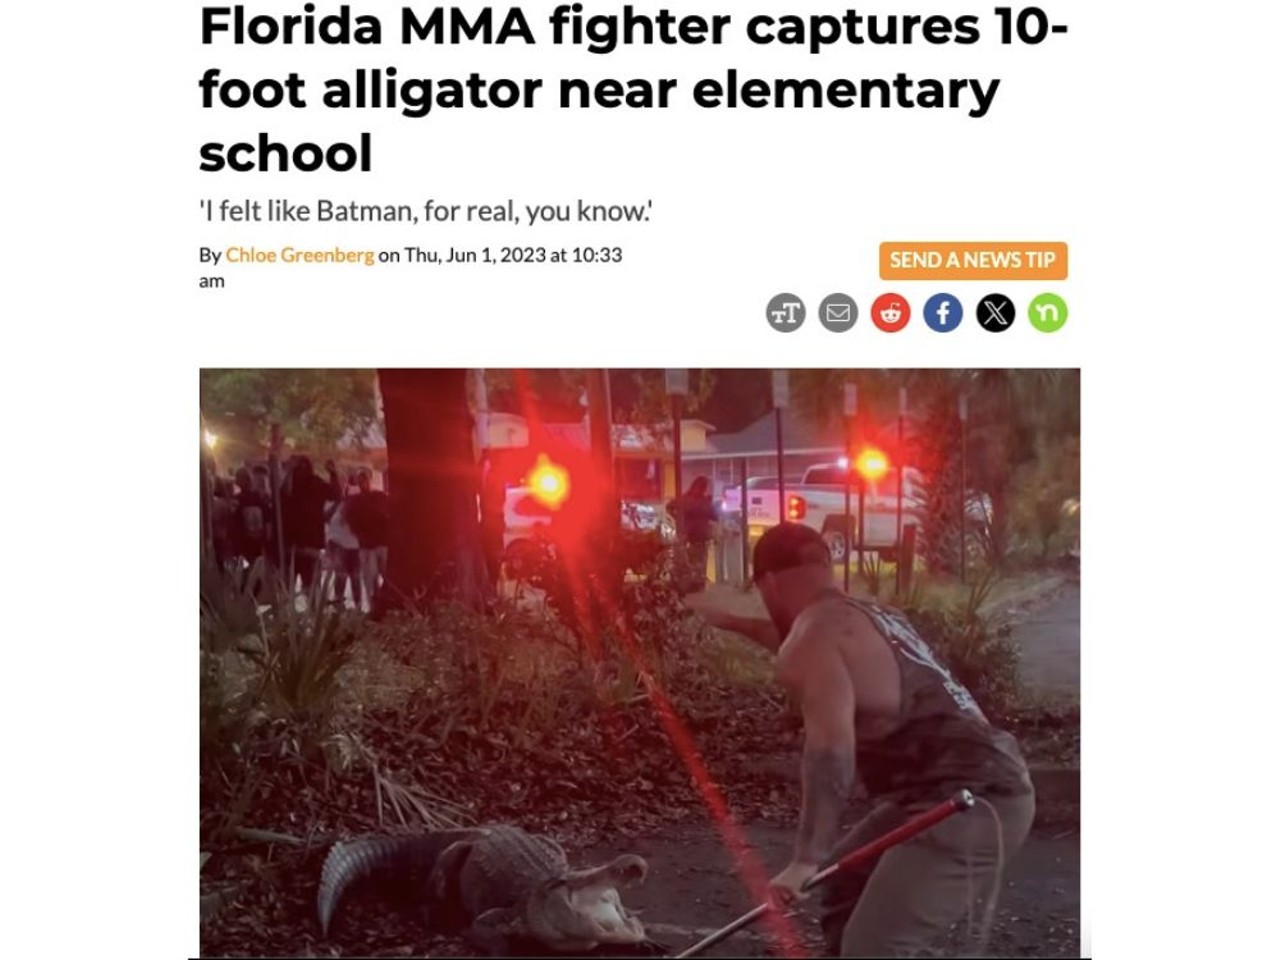 Nearly 200 people cheered and shrieked as one Florida man wrangled and captured a 10-foot alligator outside an elementary school in Jacksonville. MMA fighter and veteran Mike Dragich is seen in a video posted in May to his Instagram account (bluecollar-brawler) struggling with the large animal in a crowd-filled parking lot.
"We get there. I walked through the gate. And boom. There it was just ready to go right there in the parking lot, and we just had to get the job done," he said. Read full article